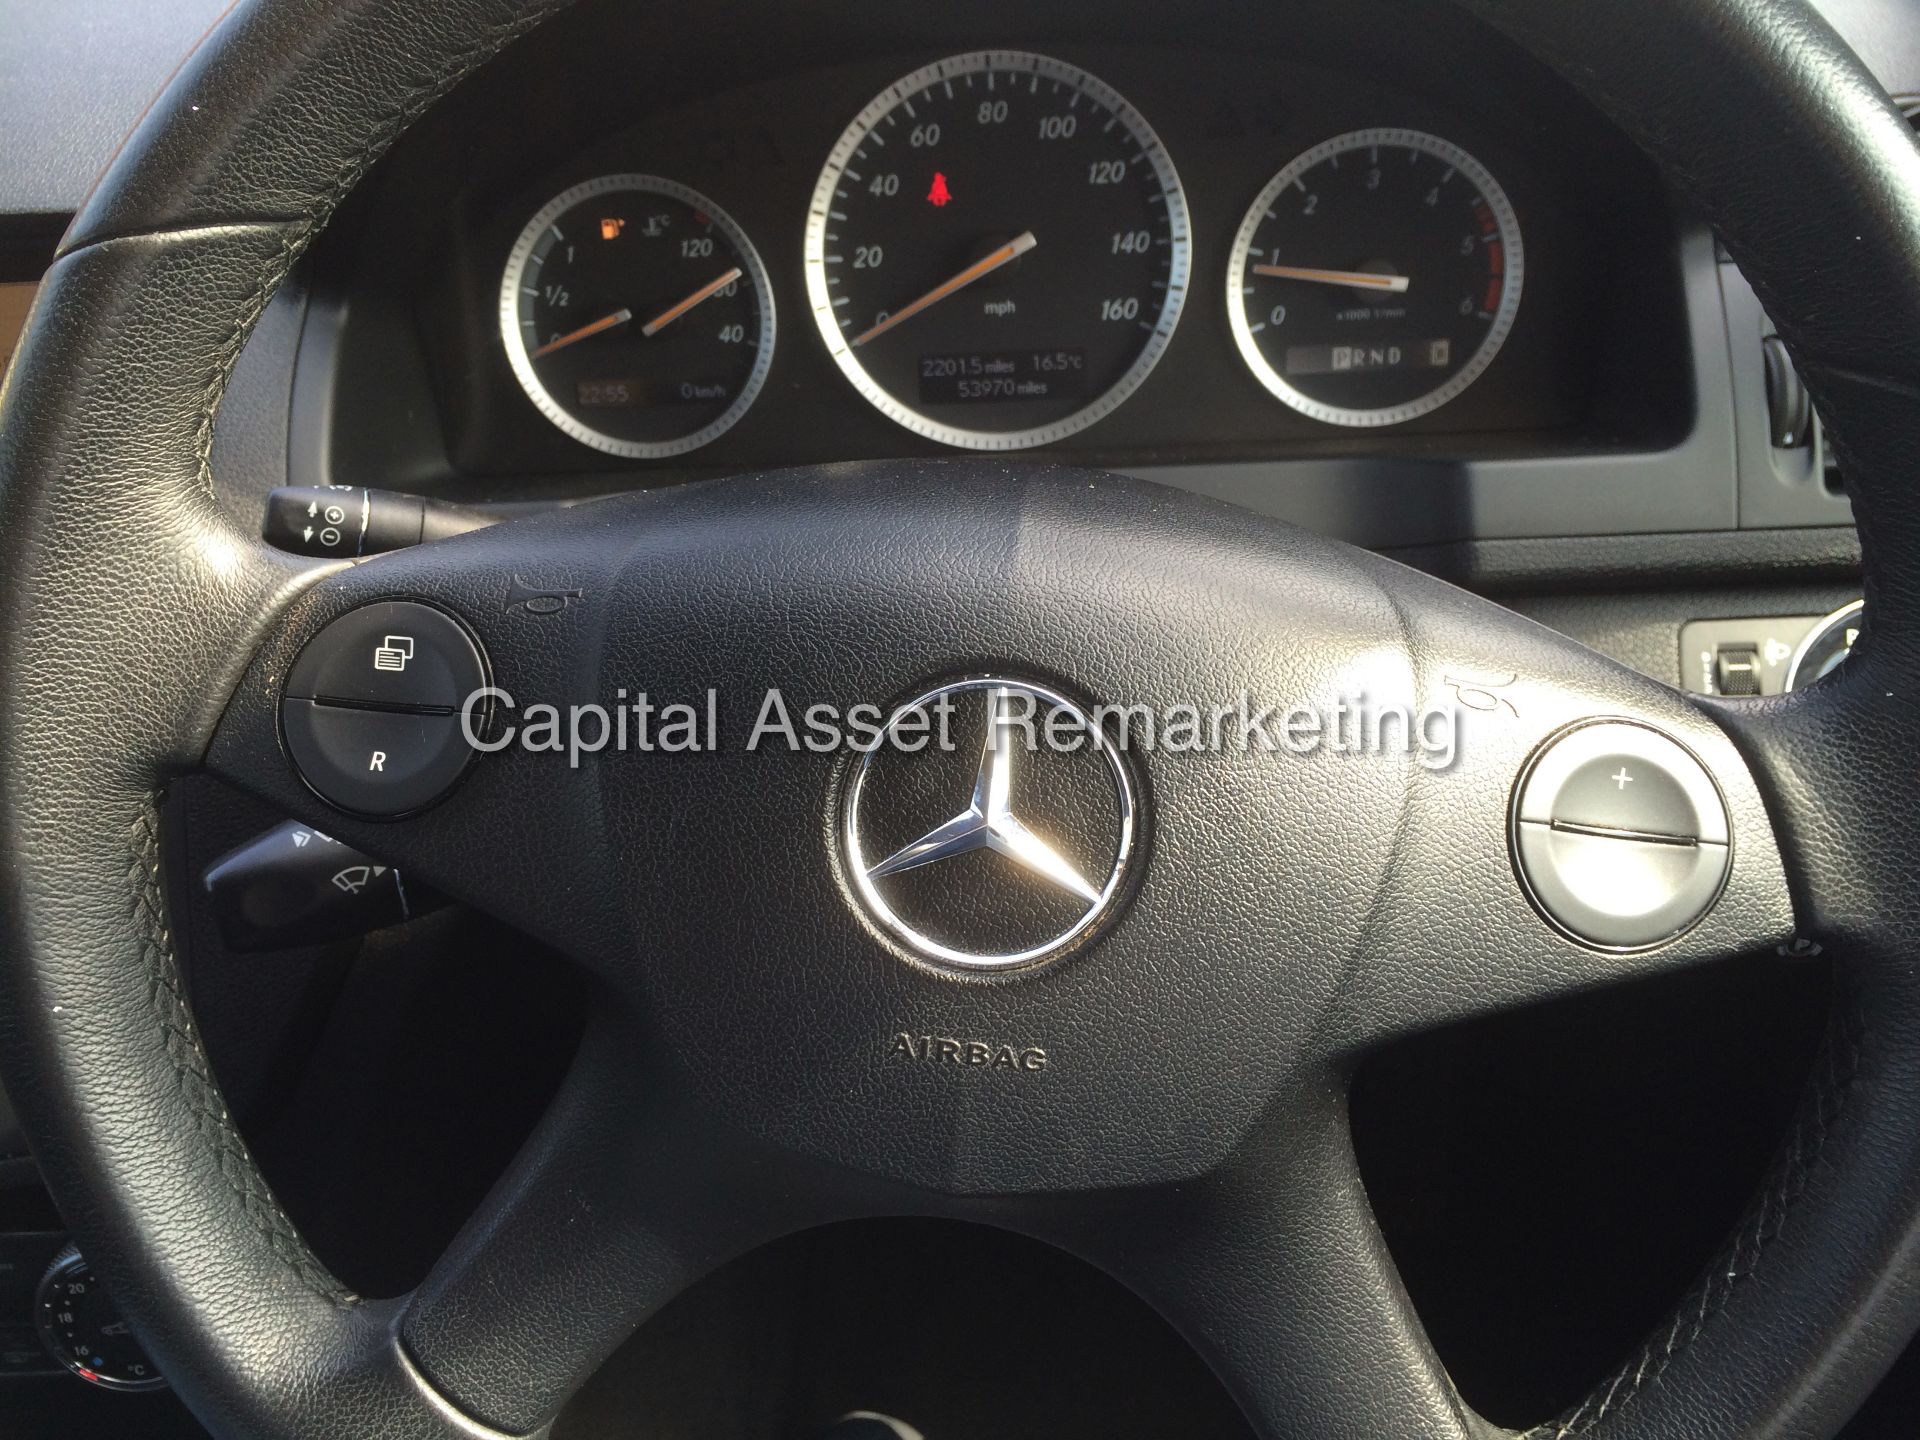 MERCEDES C220CDI (AUTO) "SE - SPECIAL EQUIPMENT" ONLY 53000 MILES FROM NEW!! FULL HISTORY!! NO VAT - Image 20 of 20